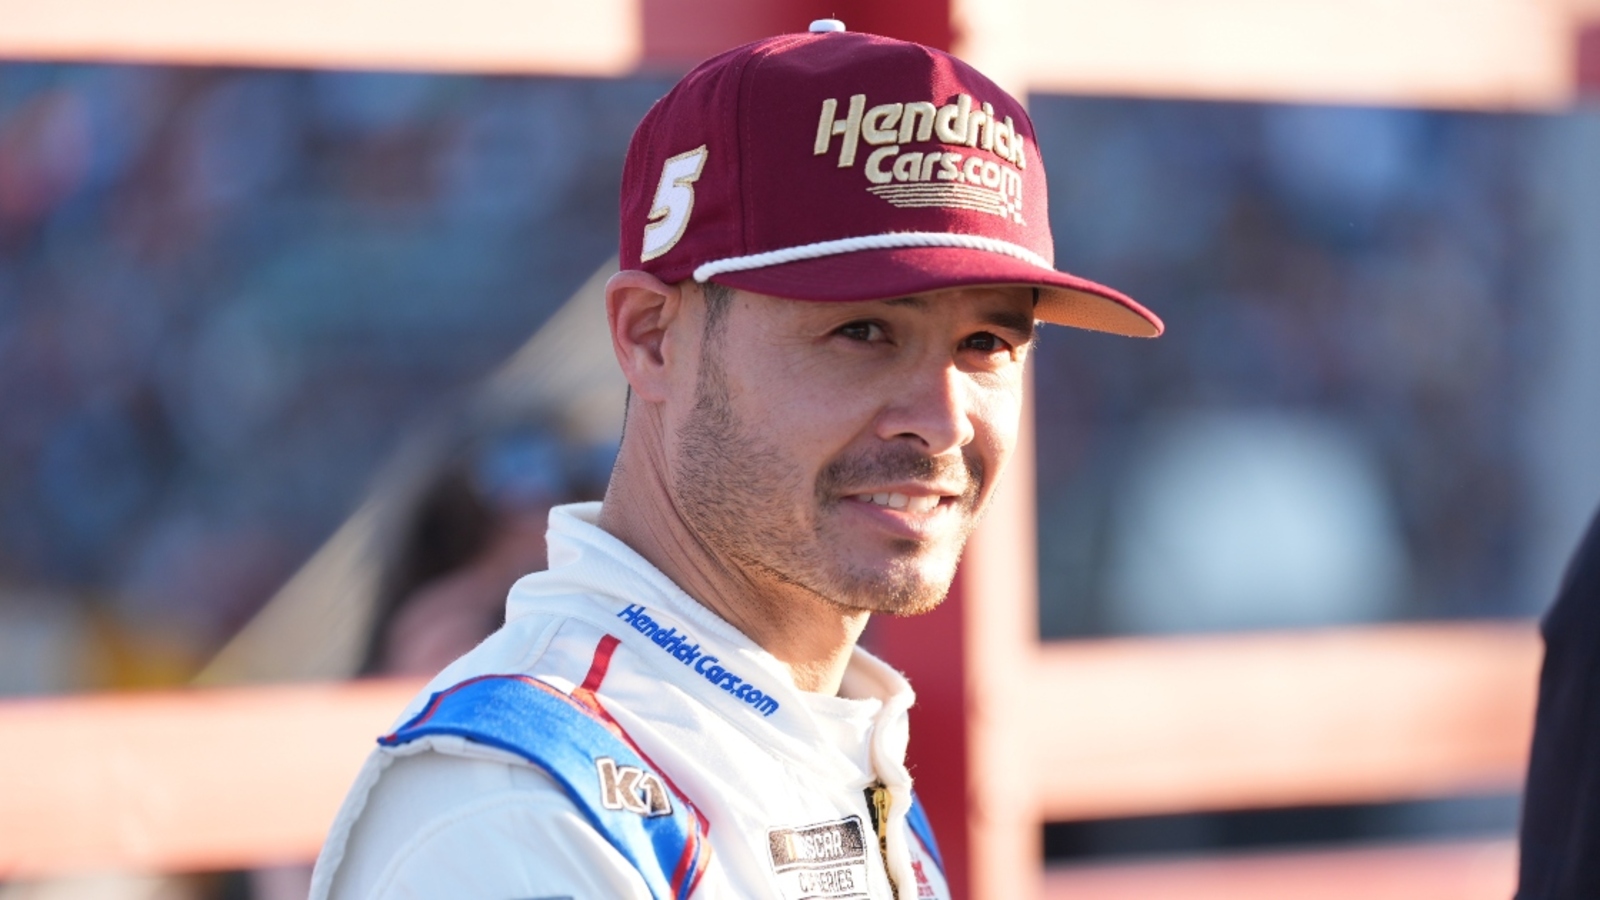 Kyle Larson reflects on ‘long day’ qualifying for Indy 500, competing in NASCAR All-Star Race